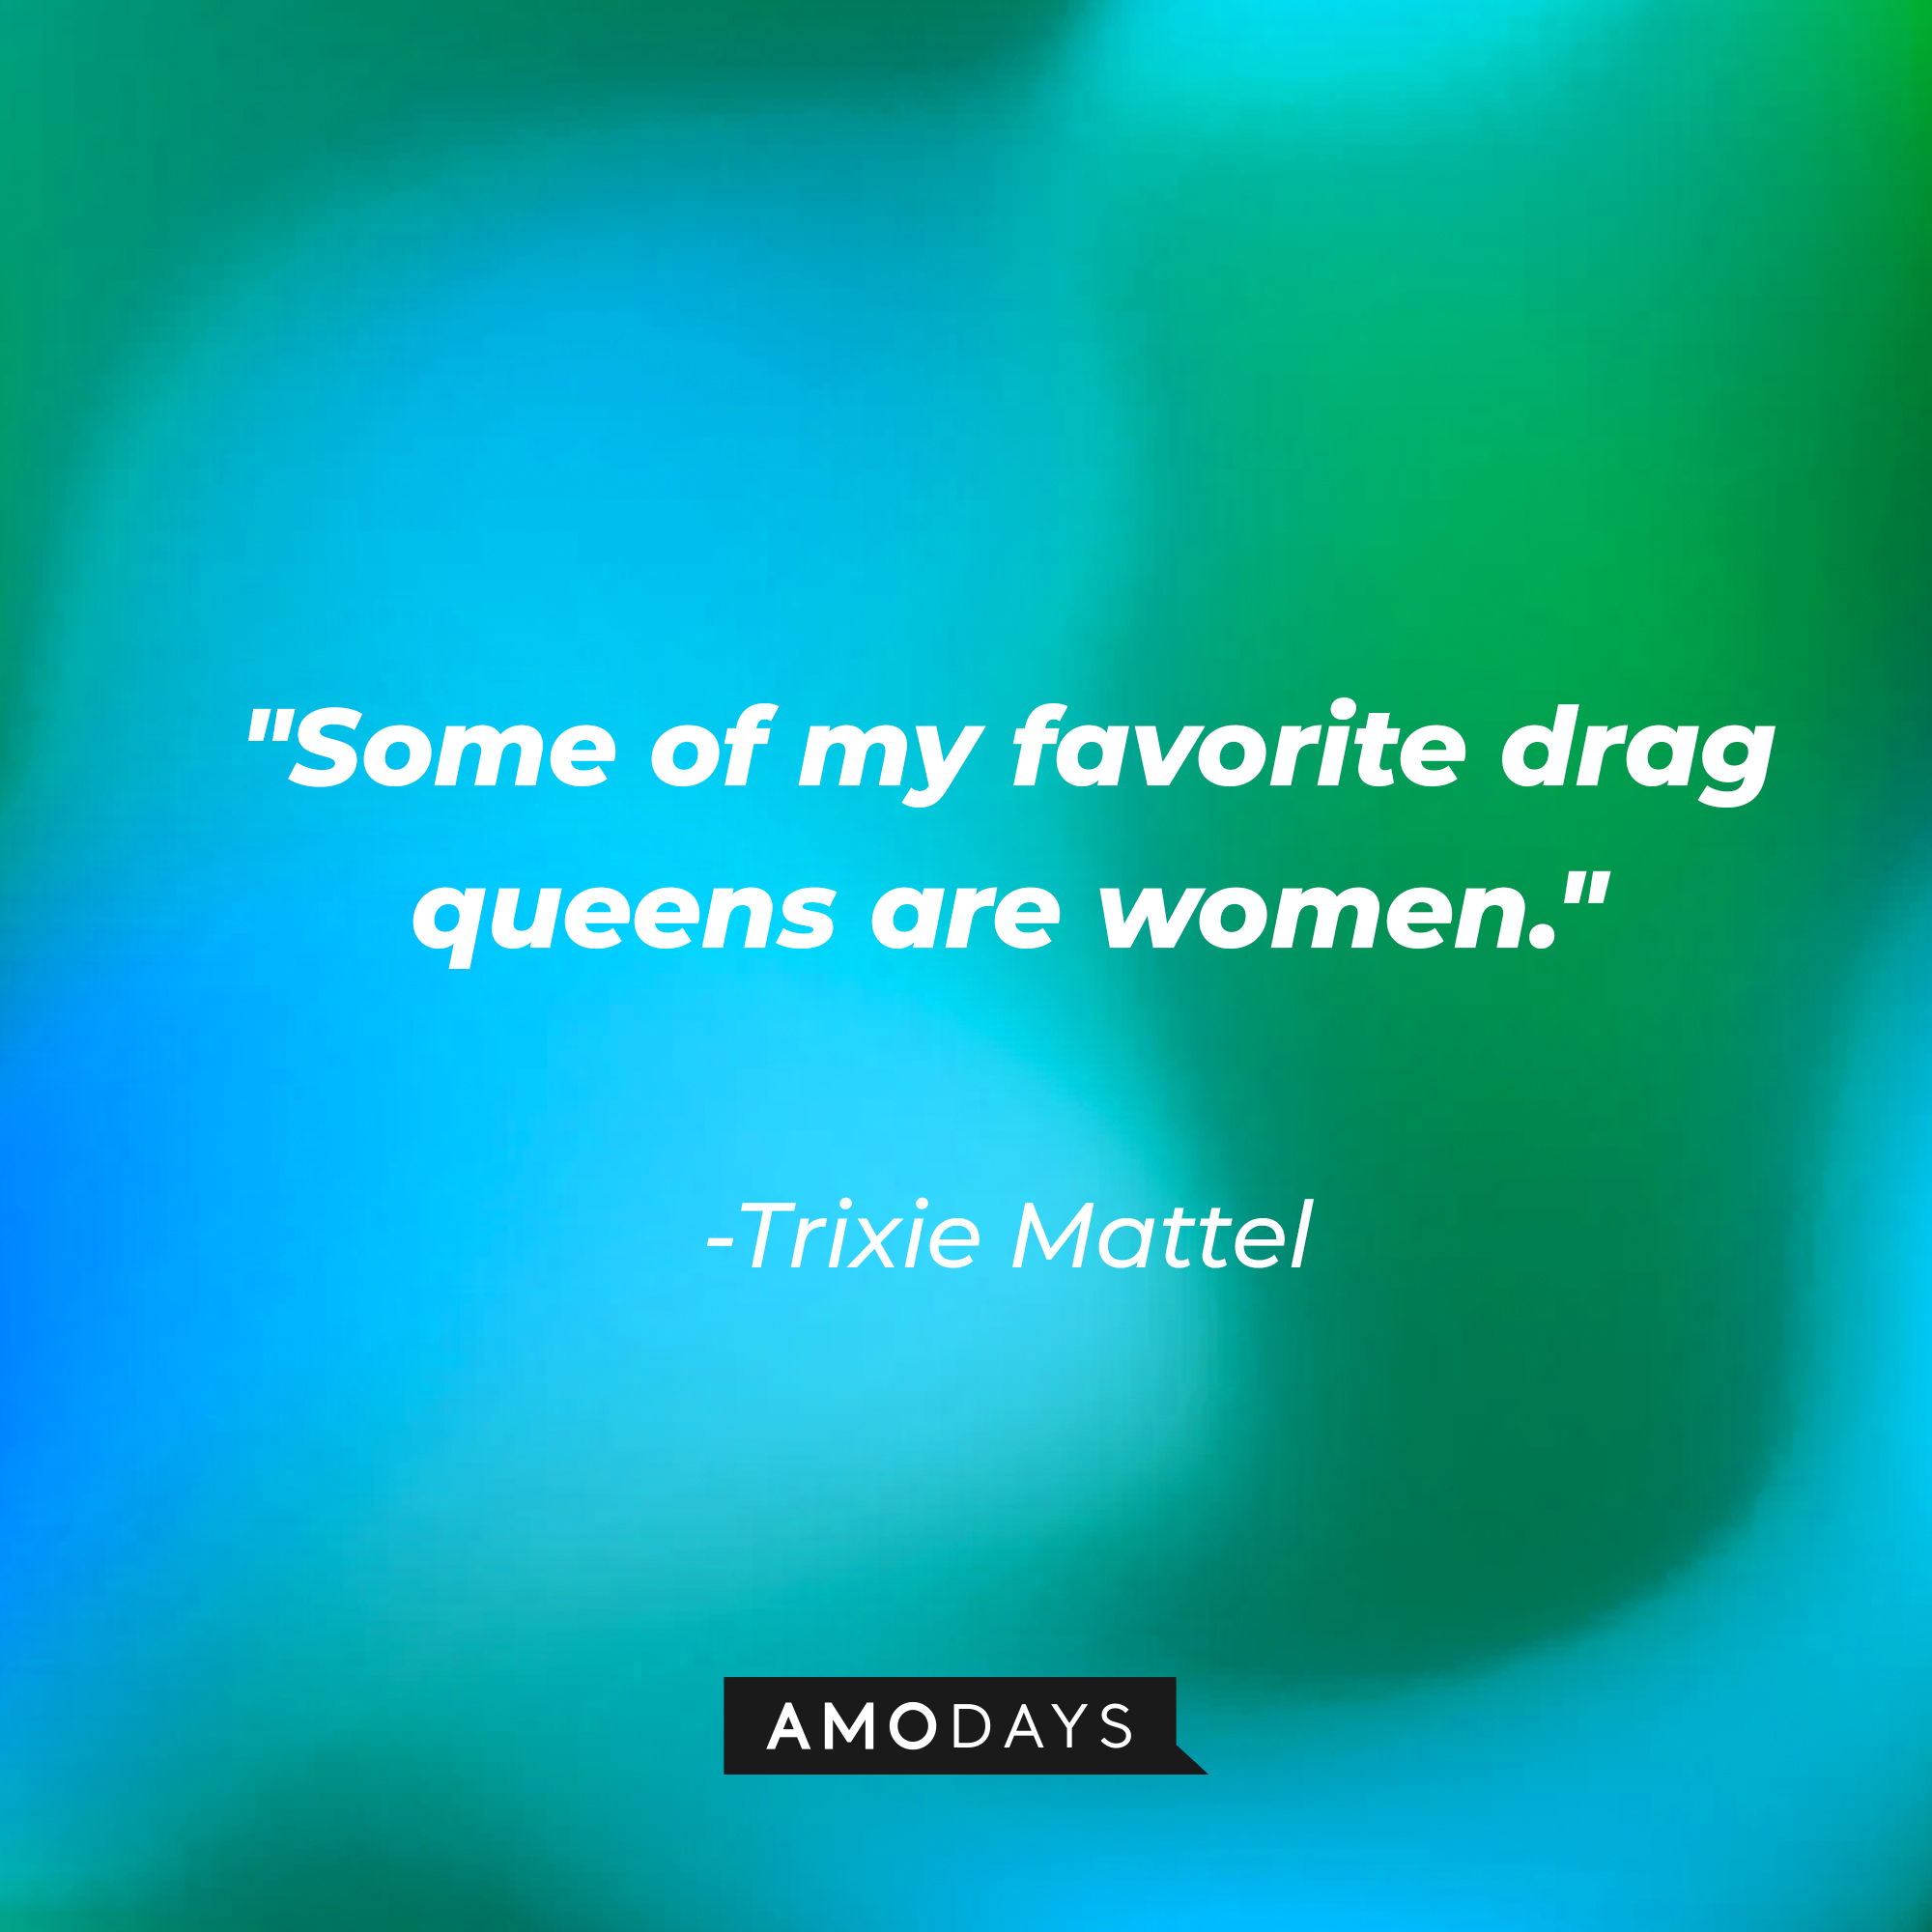 Trixie Mattel's quote: "Some of my favorite drag queens are women." | Source: AmoDays